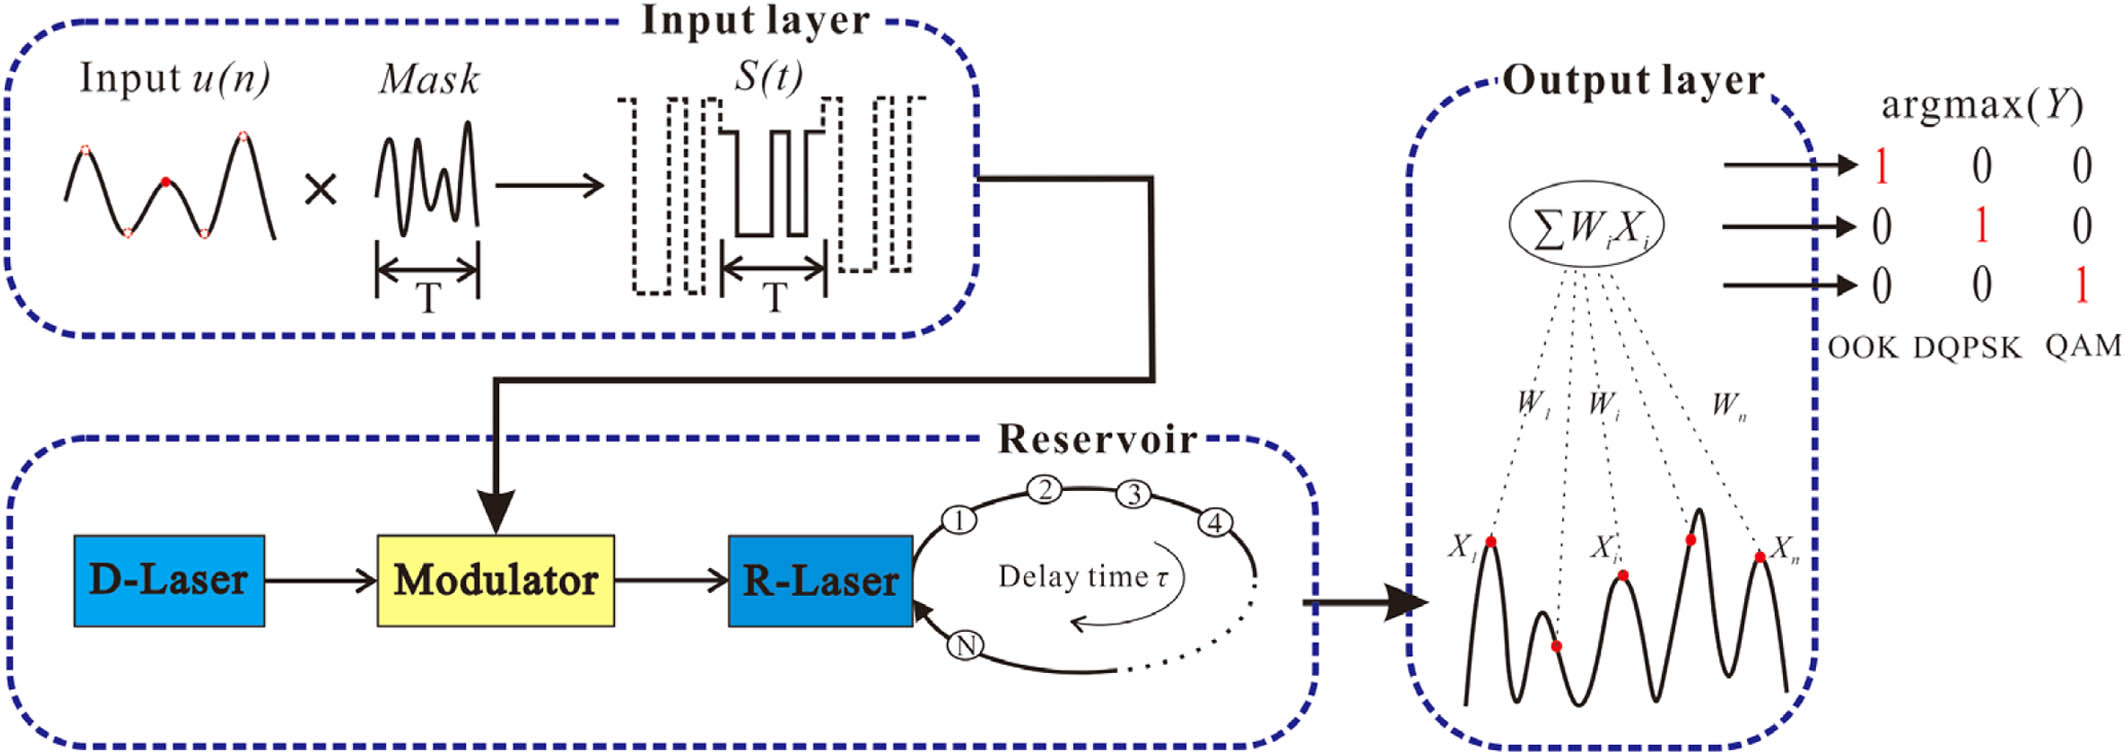 Schematic of the MFI based on the P-RC with semiconductor lasers. This system consists of three parts: input layer, reservoir, and output layer. The input u(n) is multiplied by a mask with a period of T, and then the resulting stream S(t)=Mask×u(n) is fed into the reservoir through a modulator. The reservoir is a master-slave configuration constructed by a response laser (R-Laser) with a self-delay feedback loop injected by a drive laser (D-Laser). Note that there are N virtual nodes at each interval θ in the feedback loop with a delay time of T. The transient states of the R-Laser Xi are read out for training the connection weights Wi between the reservoir and the output layer. The final output nodes are weighted by the sums of the transient states ∑XiWi.